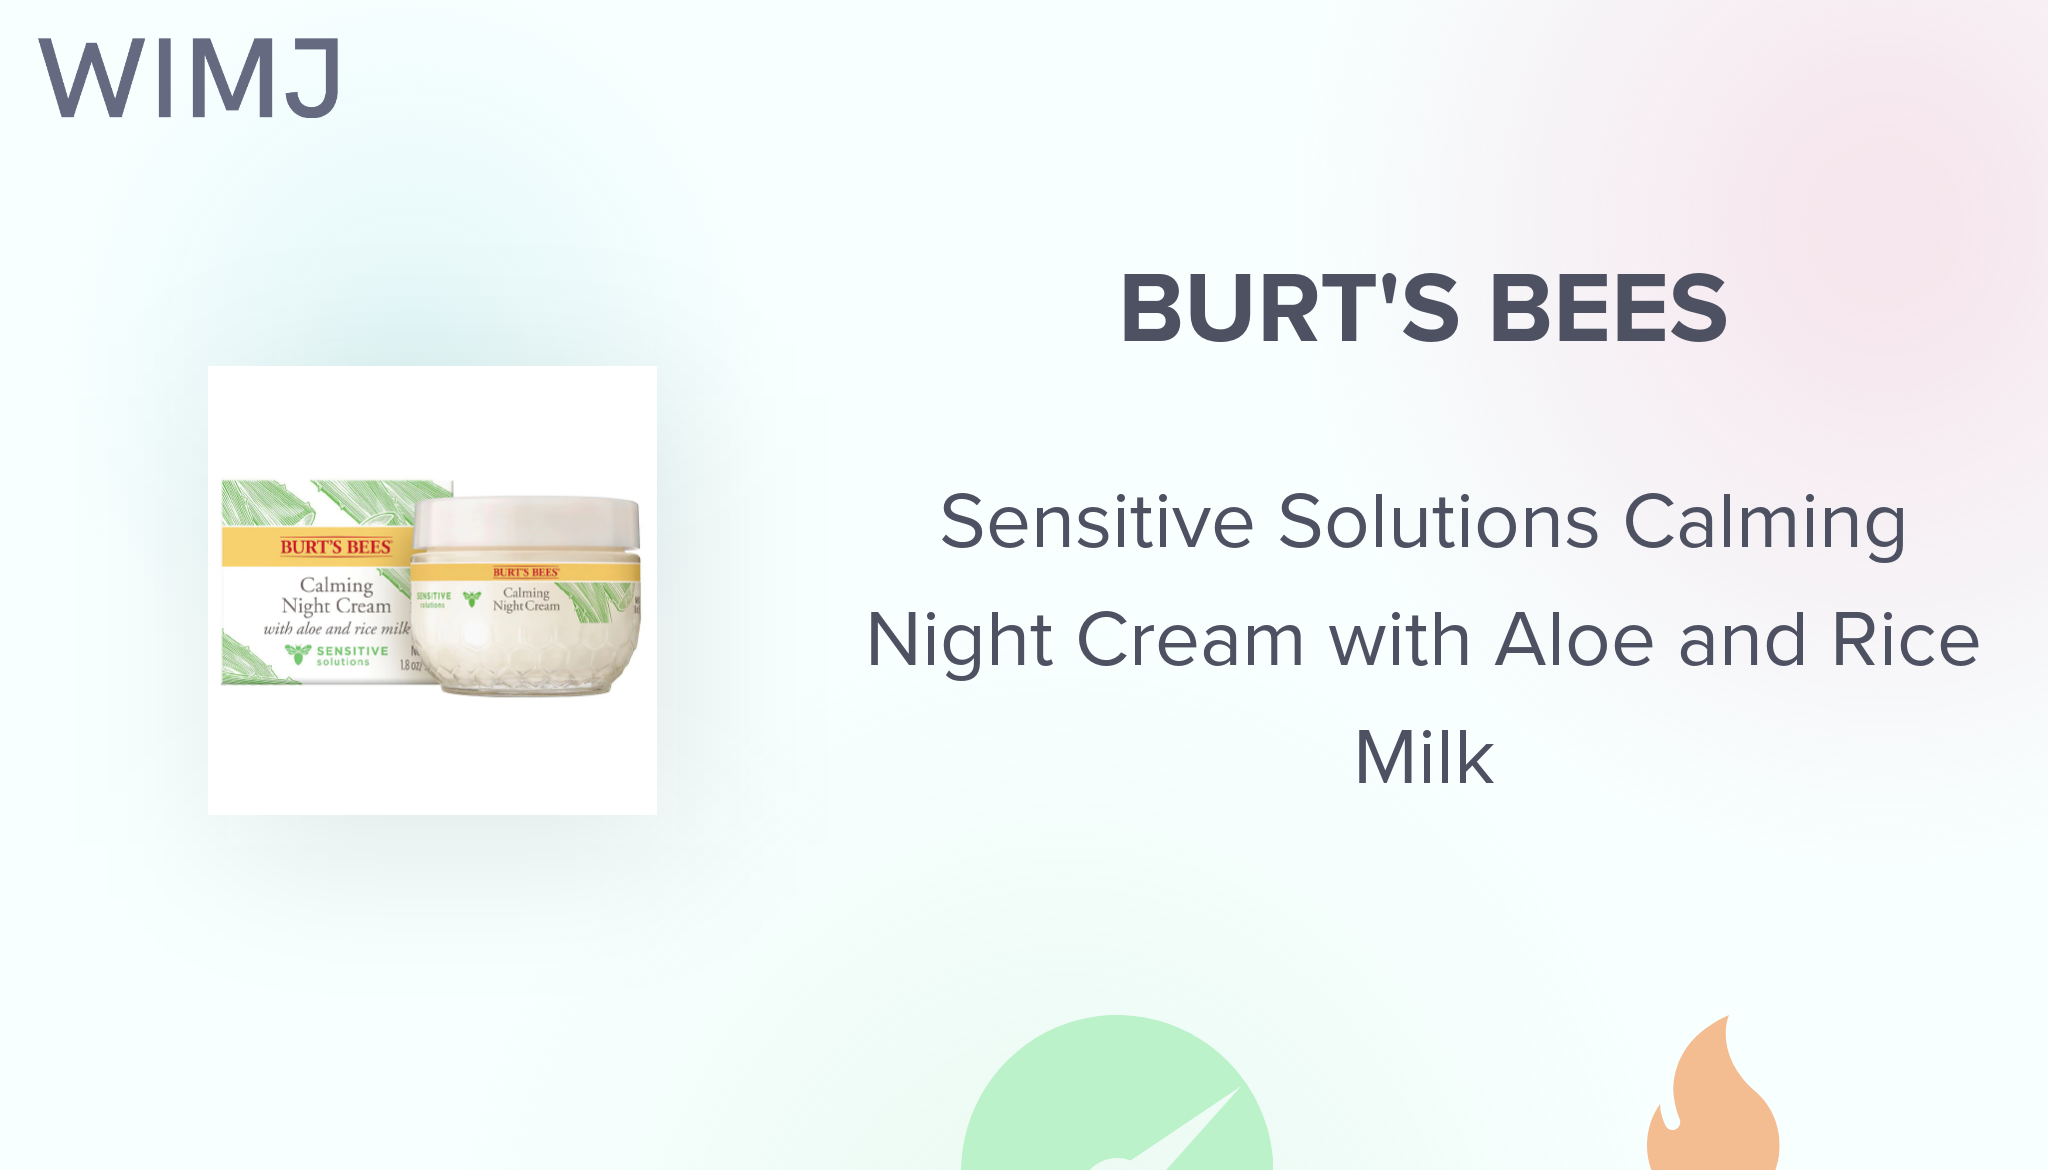 Burt's Bees Sensitive Solutions Calming with Aloe and Rice Milk